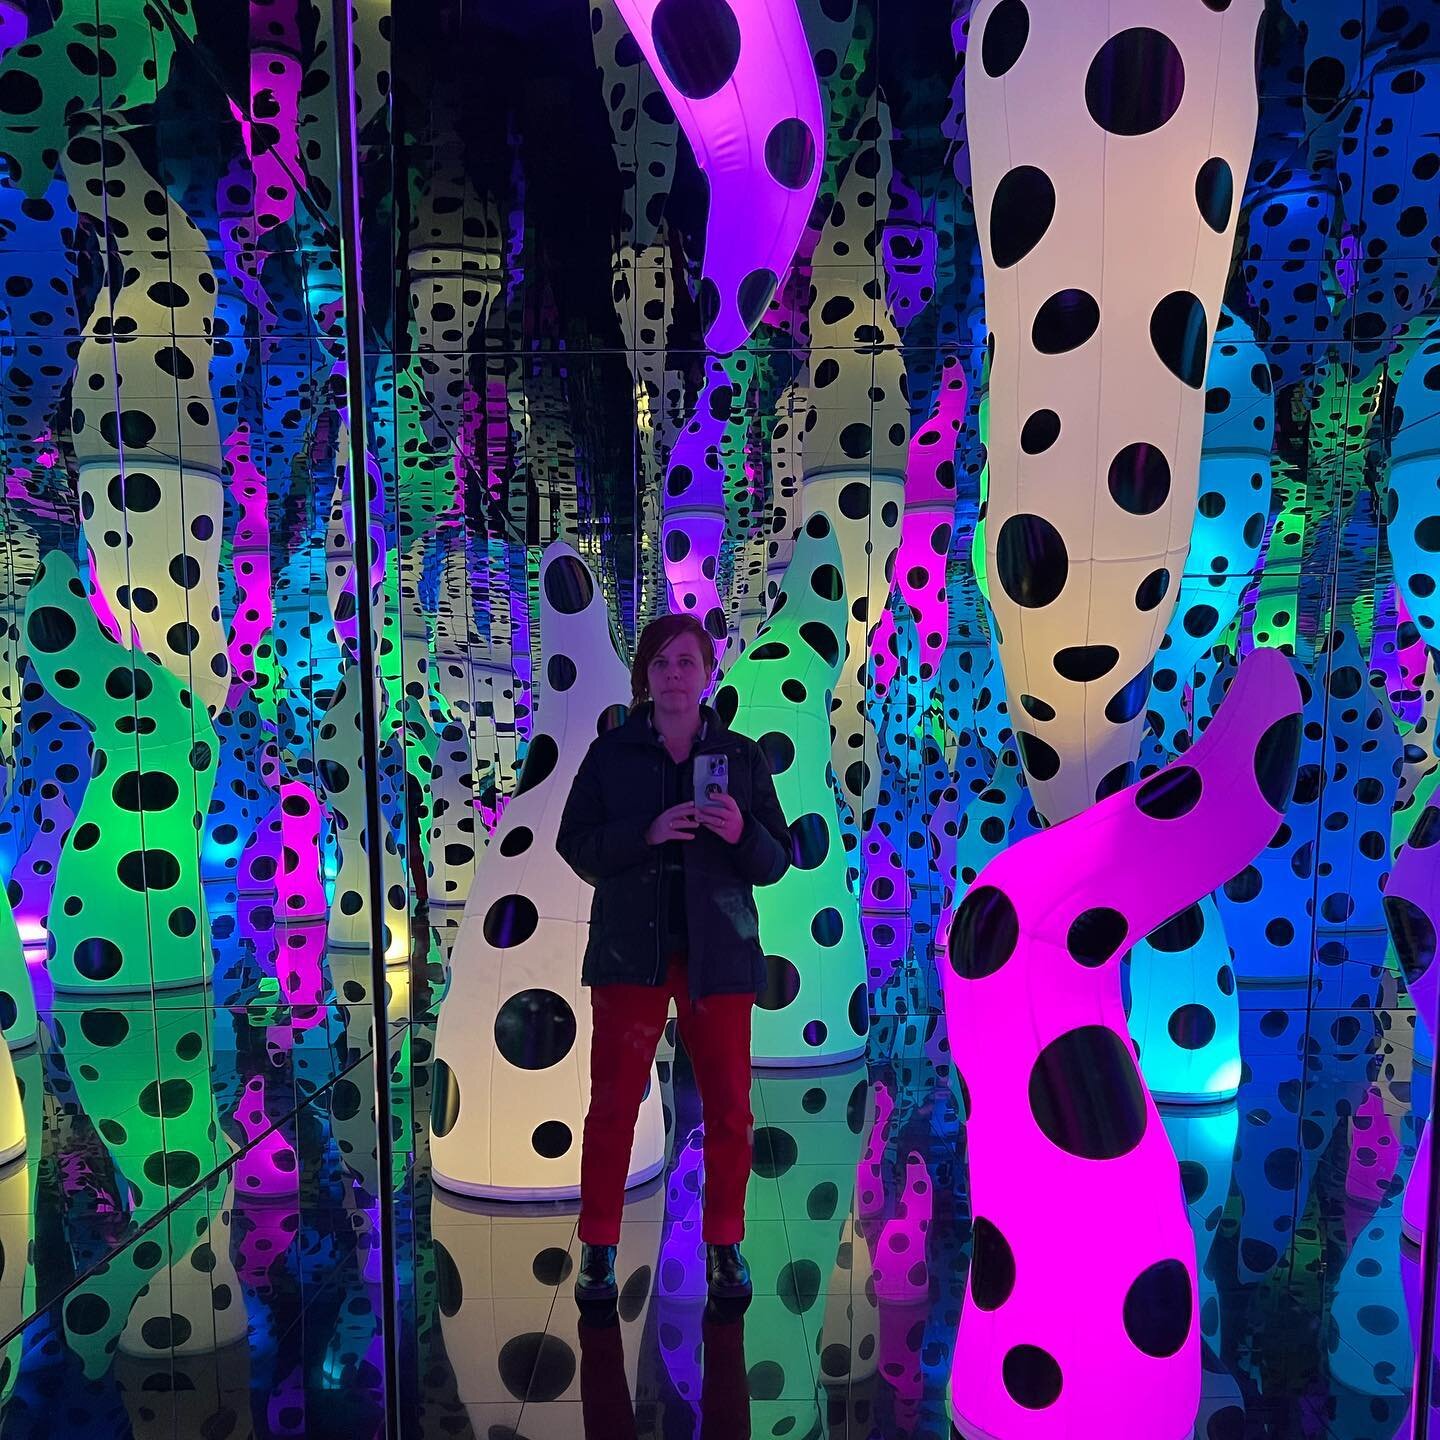 Where&rsquo;s Shannon? In an infinity room of love and joy created by #yayoikusama @icaboston